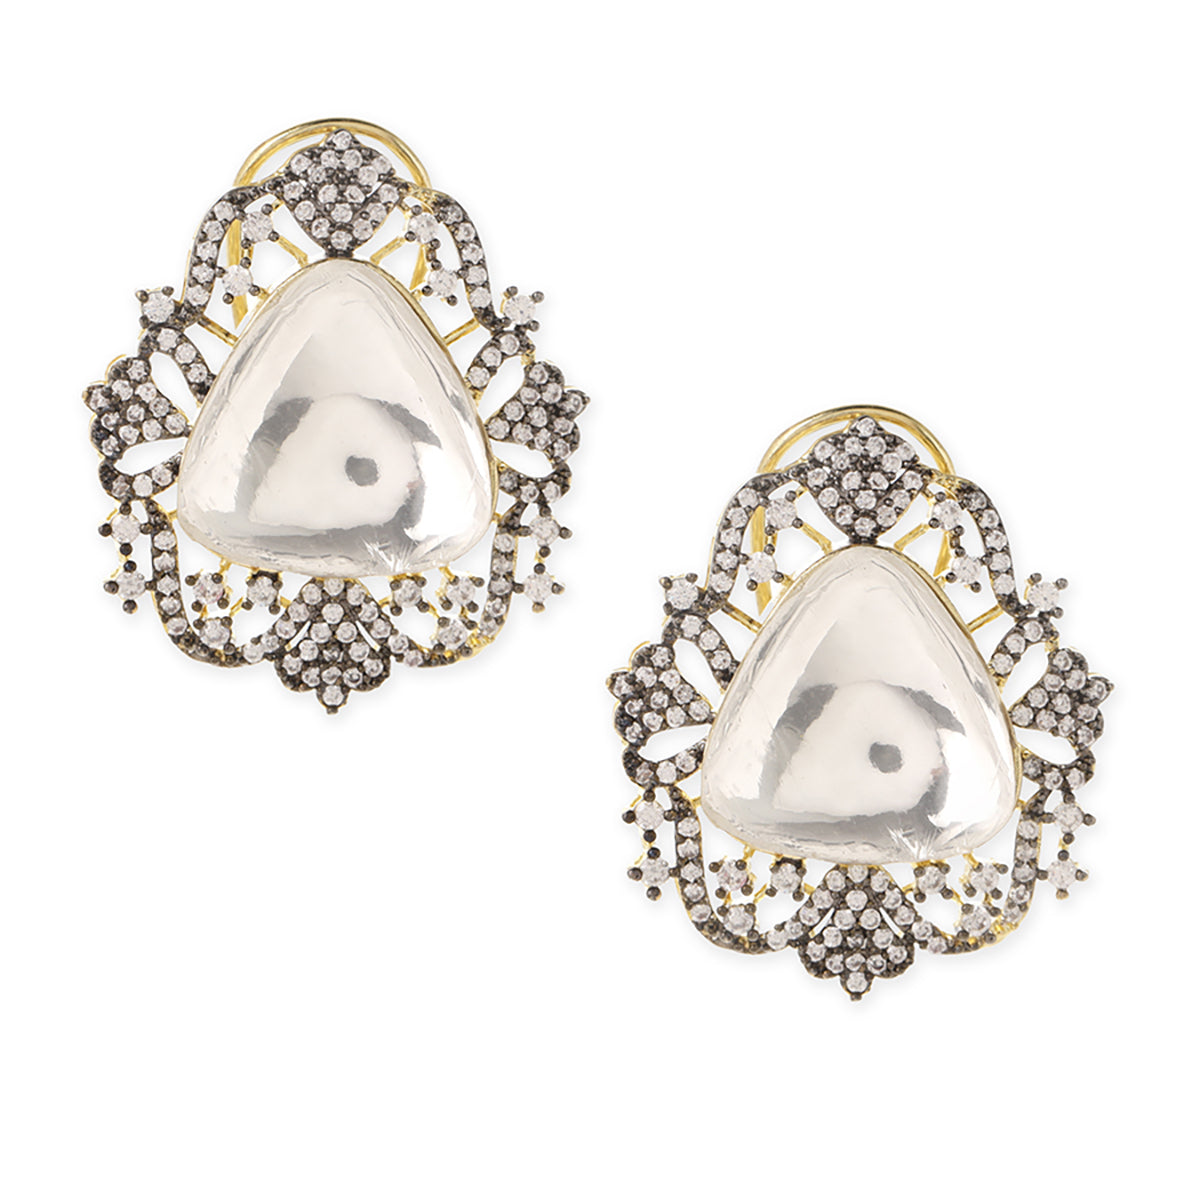 Gold-Toned Contemporary Studs Earrings